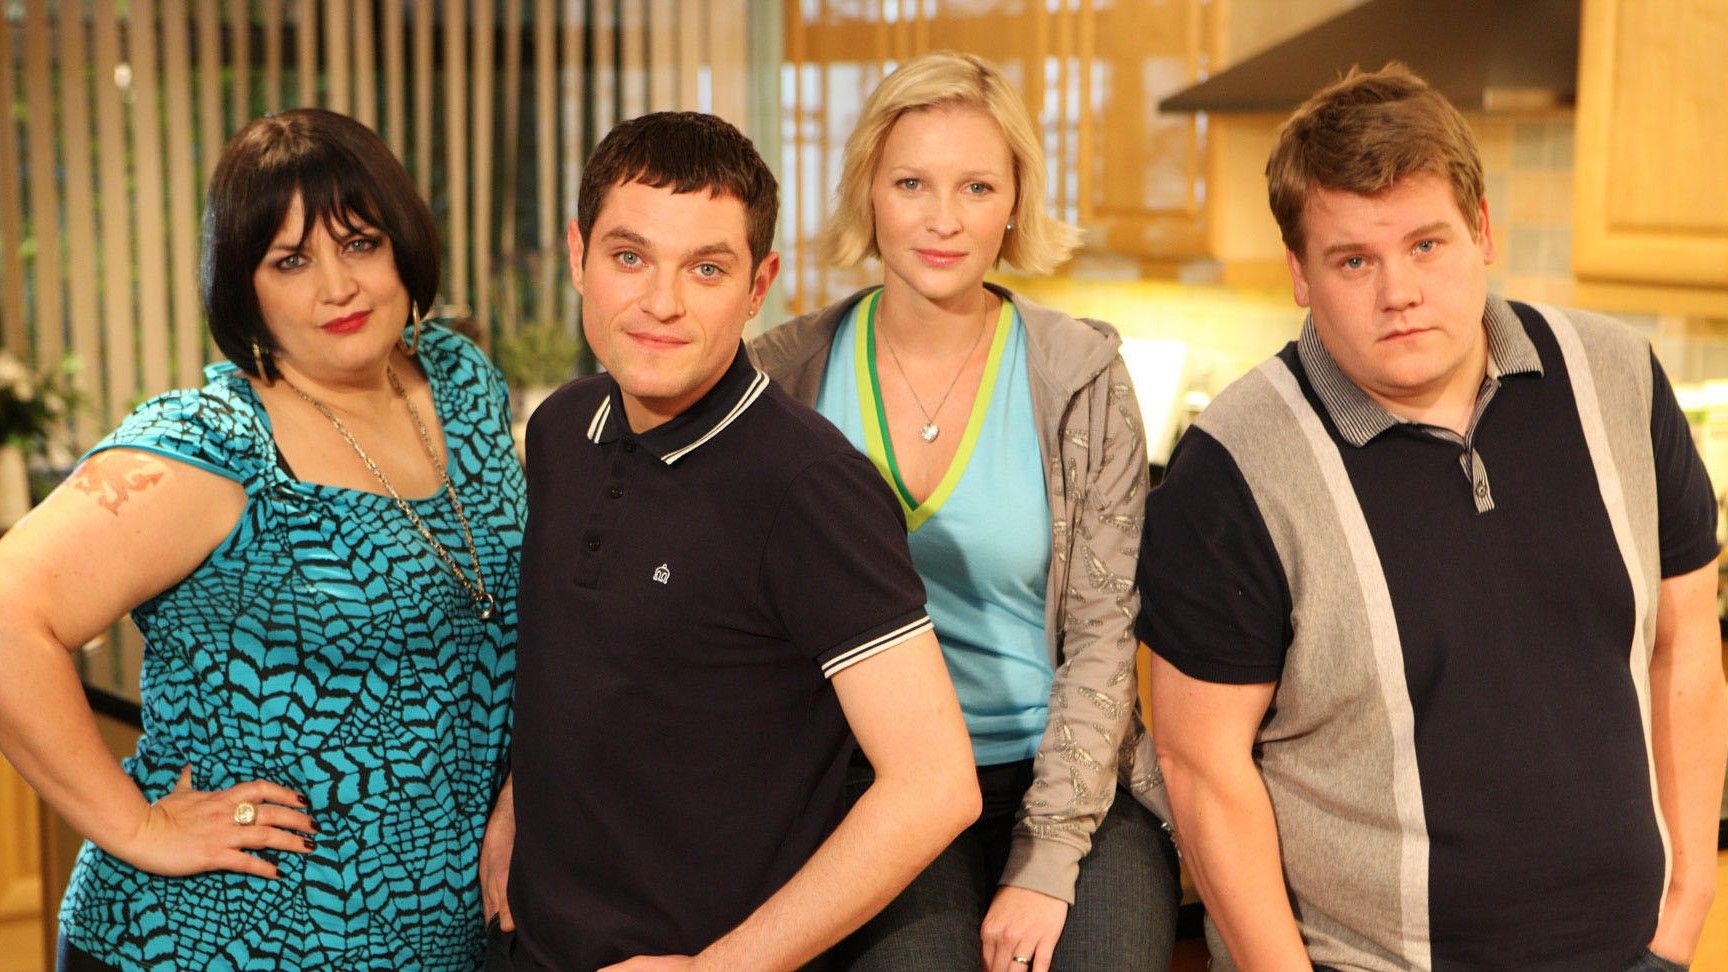 gavin & stacey and the trouble with sitcom revivals